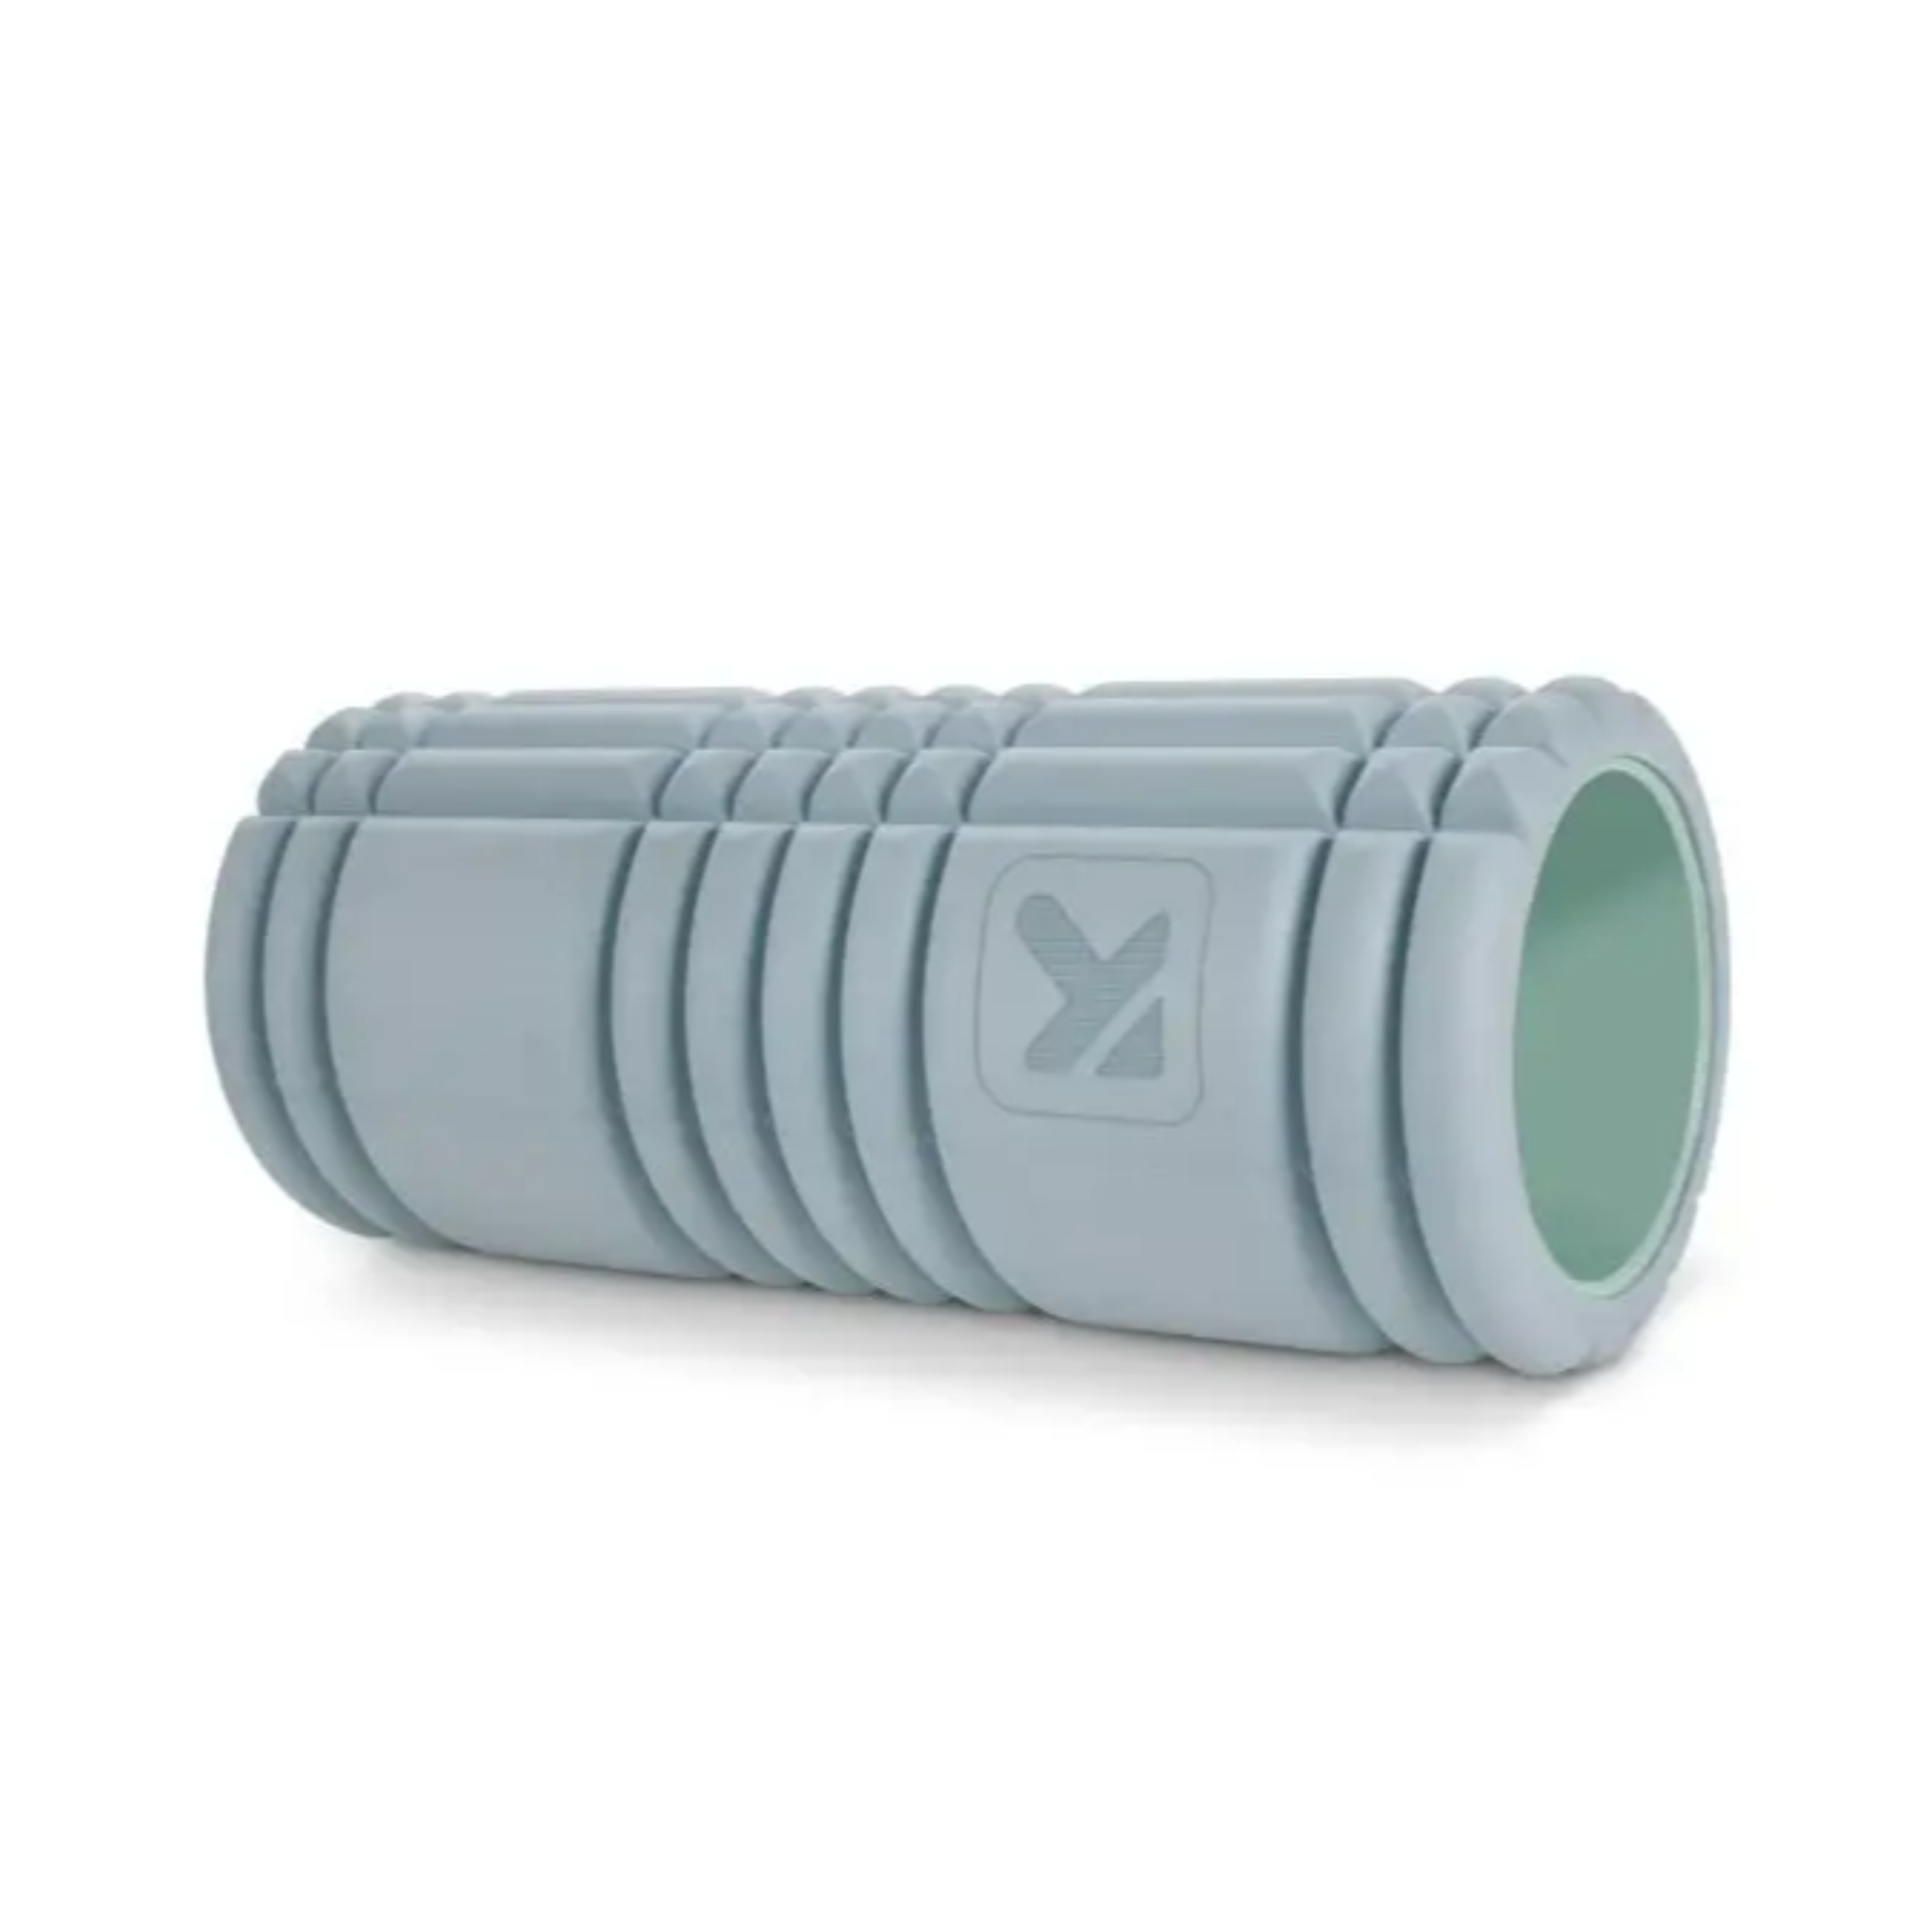 TRIGGER POINT TECHNOLOGIES THE GRID FOAM ROLLER - RECYCLED SLATE 